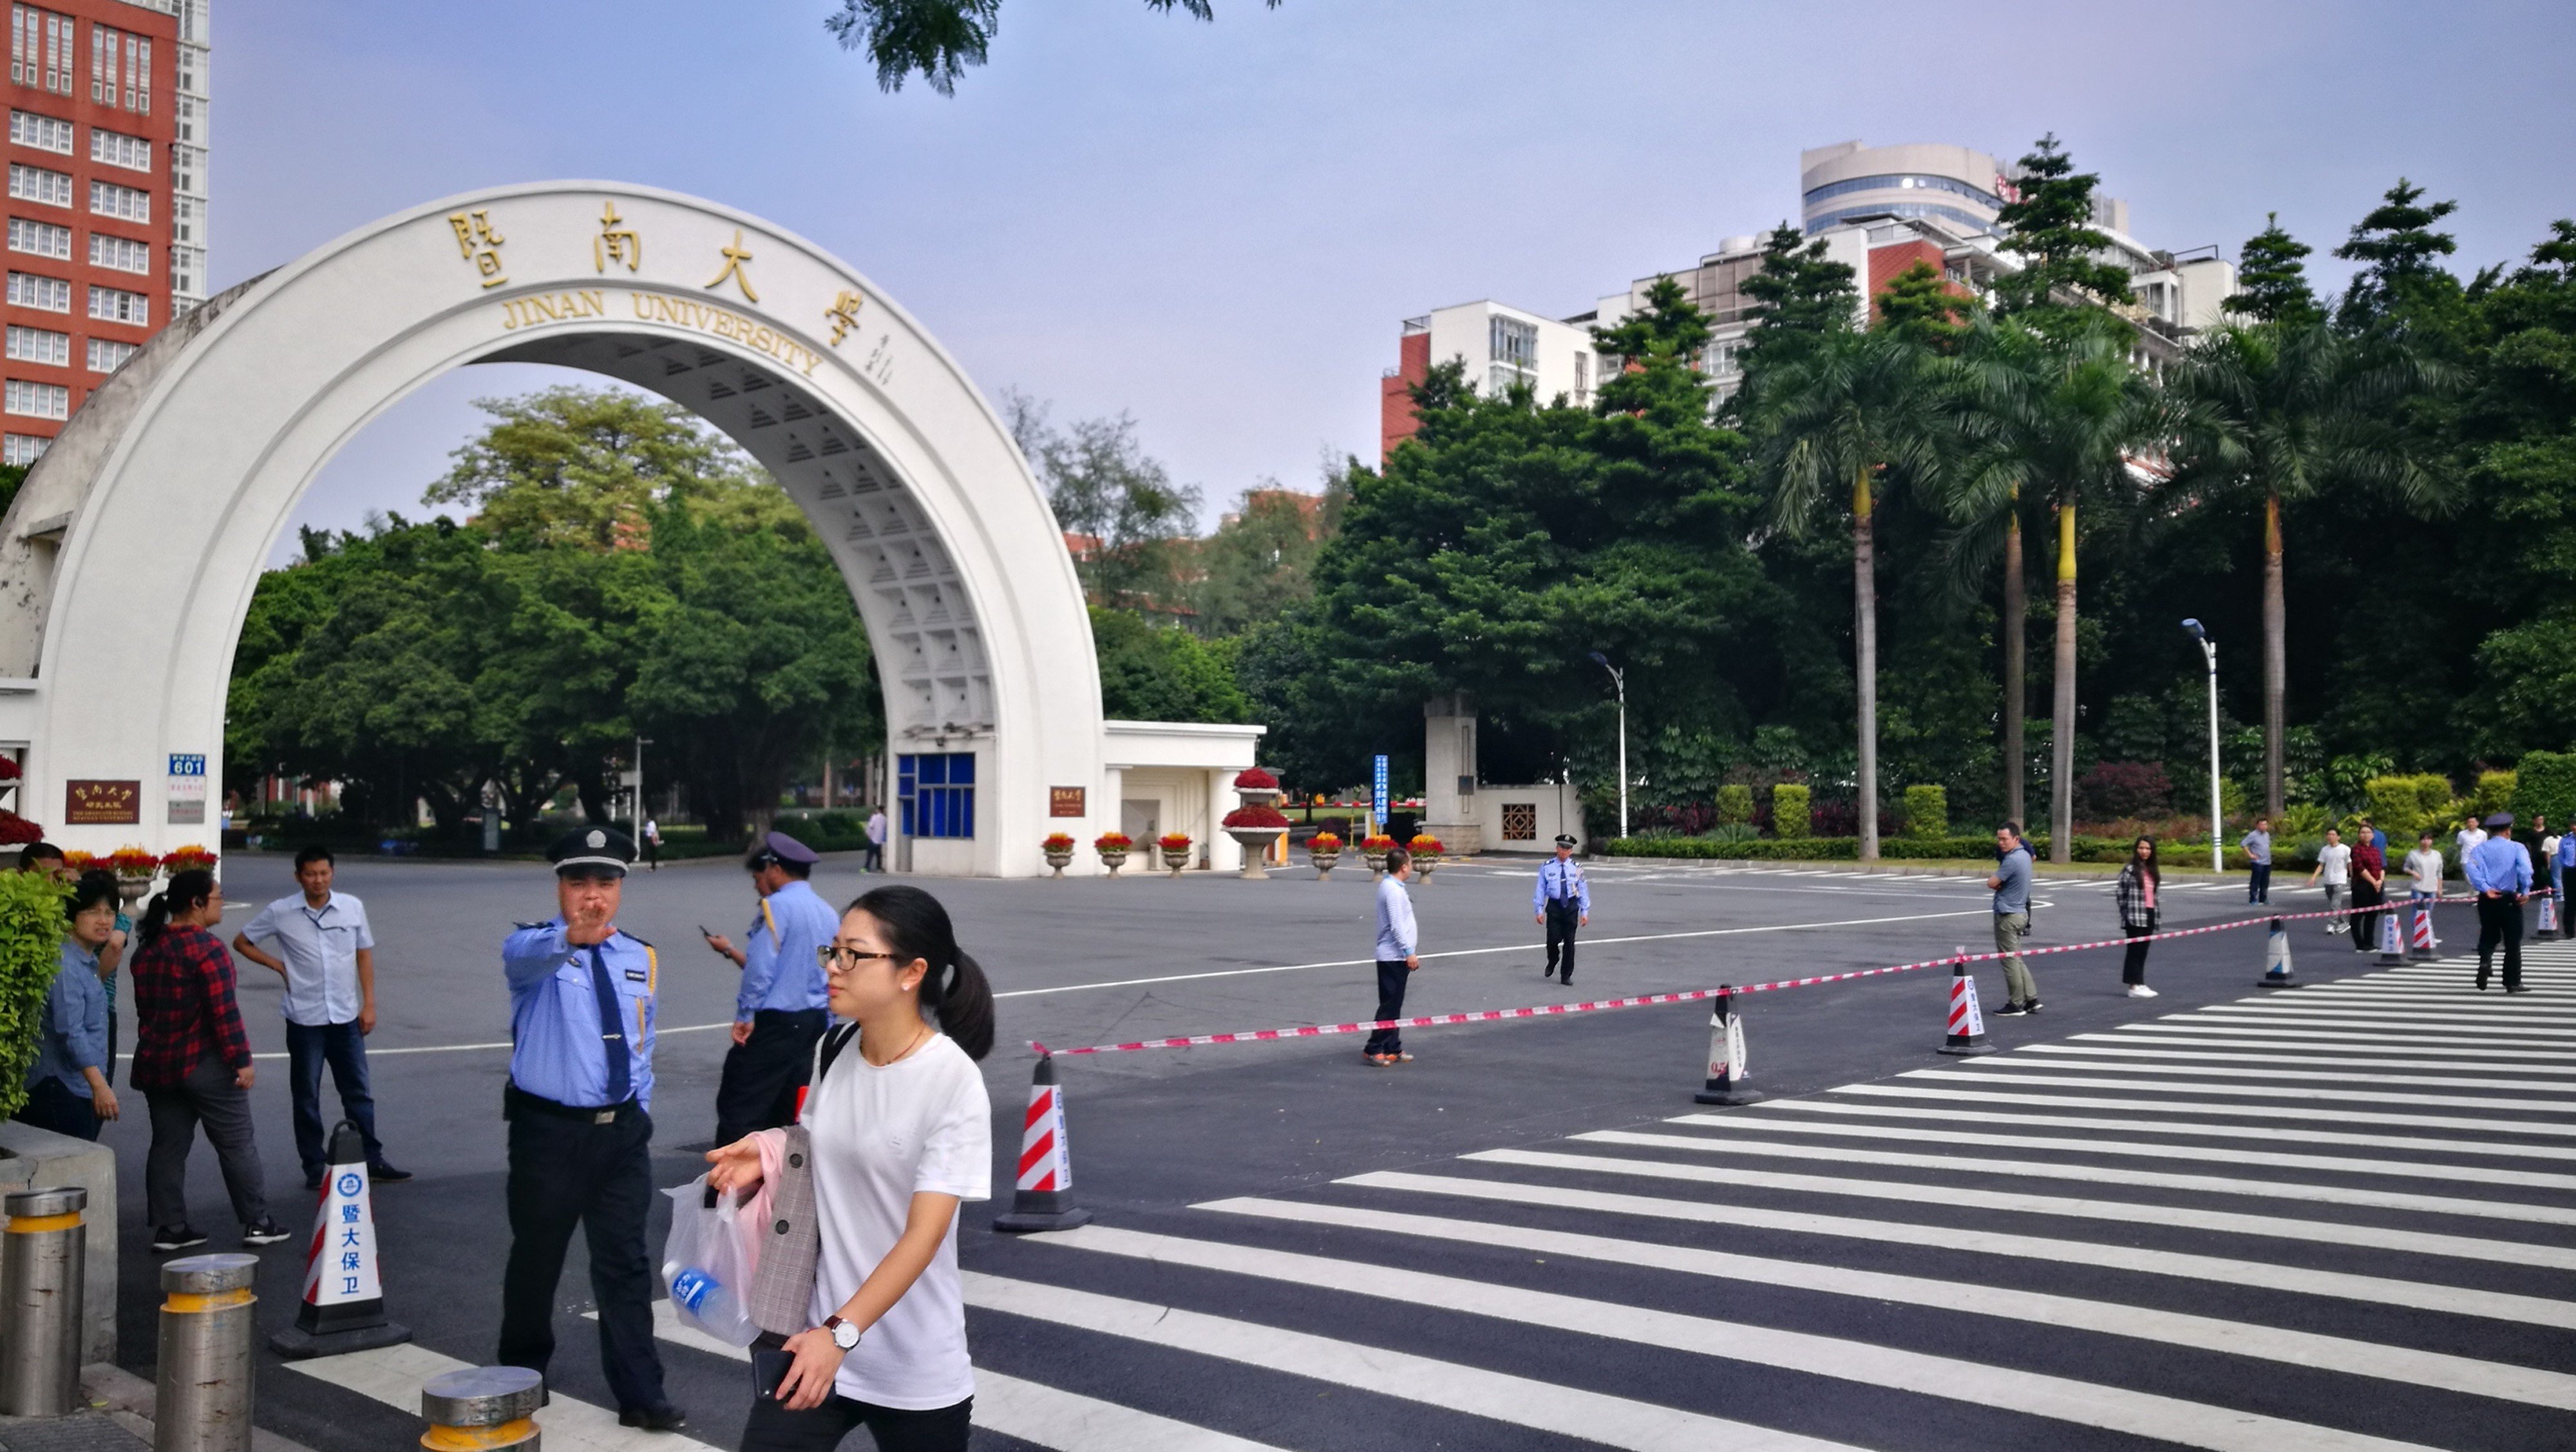 Jinan University students in Guangzhou were told to take Tuesday and Wednesday off in anticipation of President Xi Jinping’s visit to the campus. Photo: He Huifeng